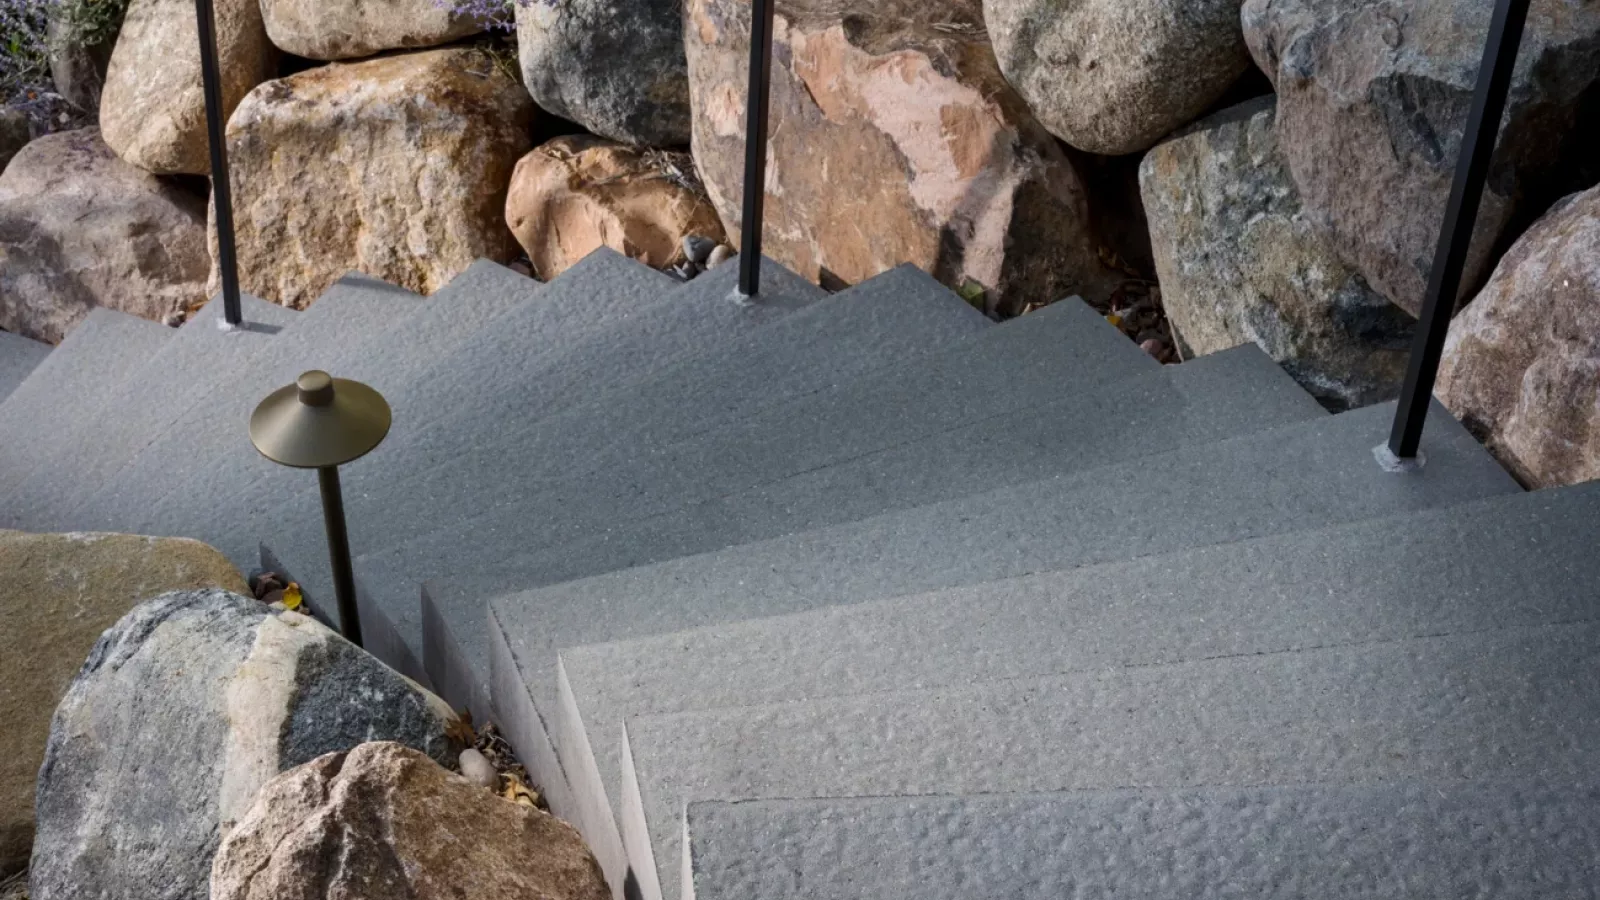 Landings™ Step with a limestone-inspired texture, exclusively at AR Stoneworks & Outdoor Living.